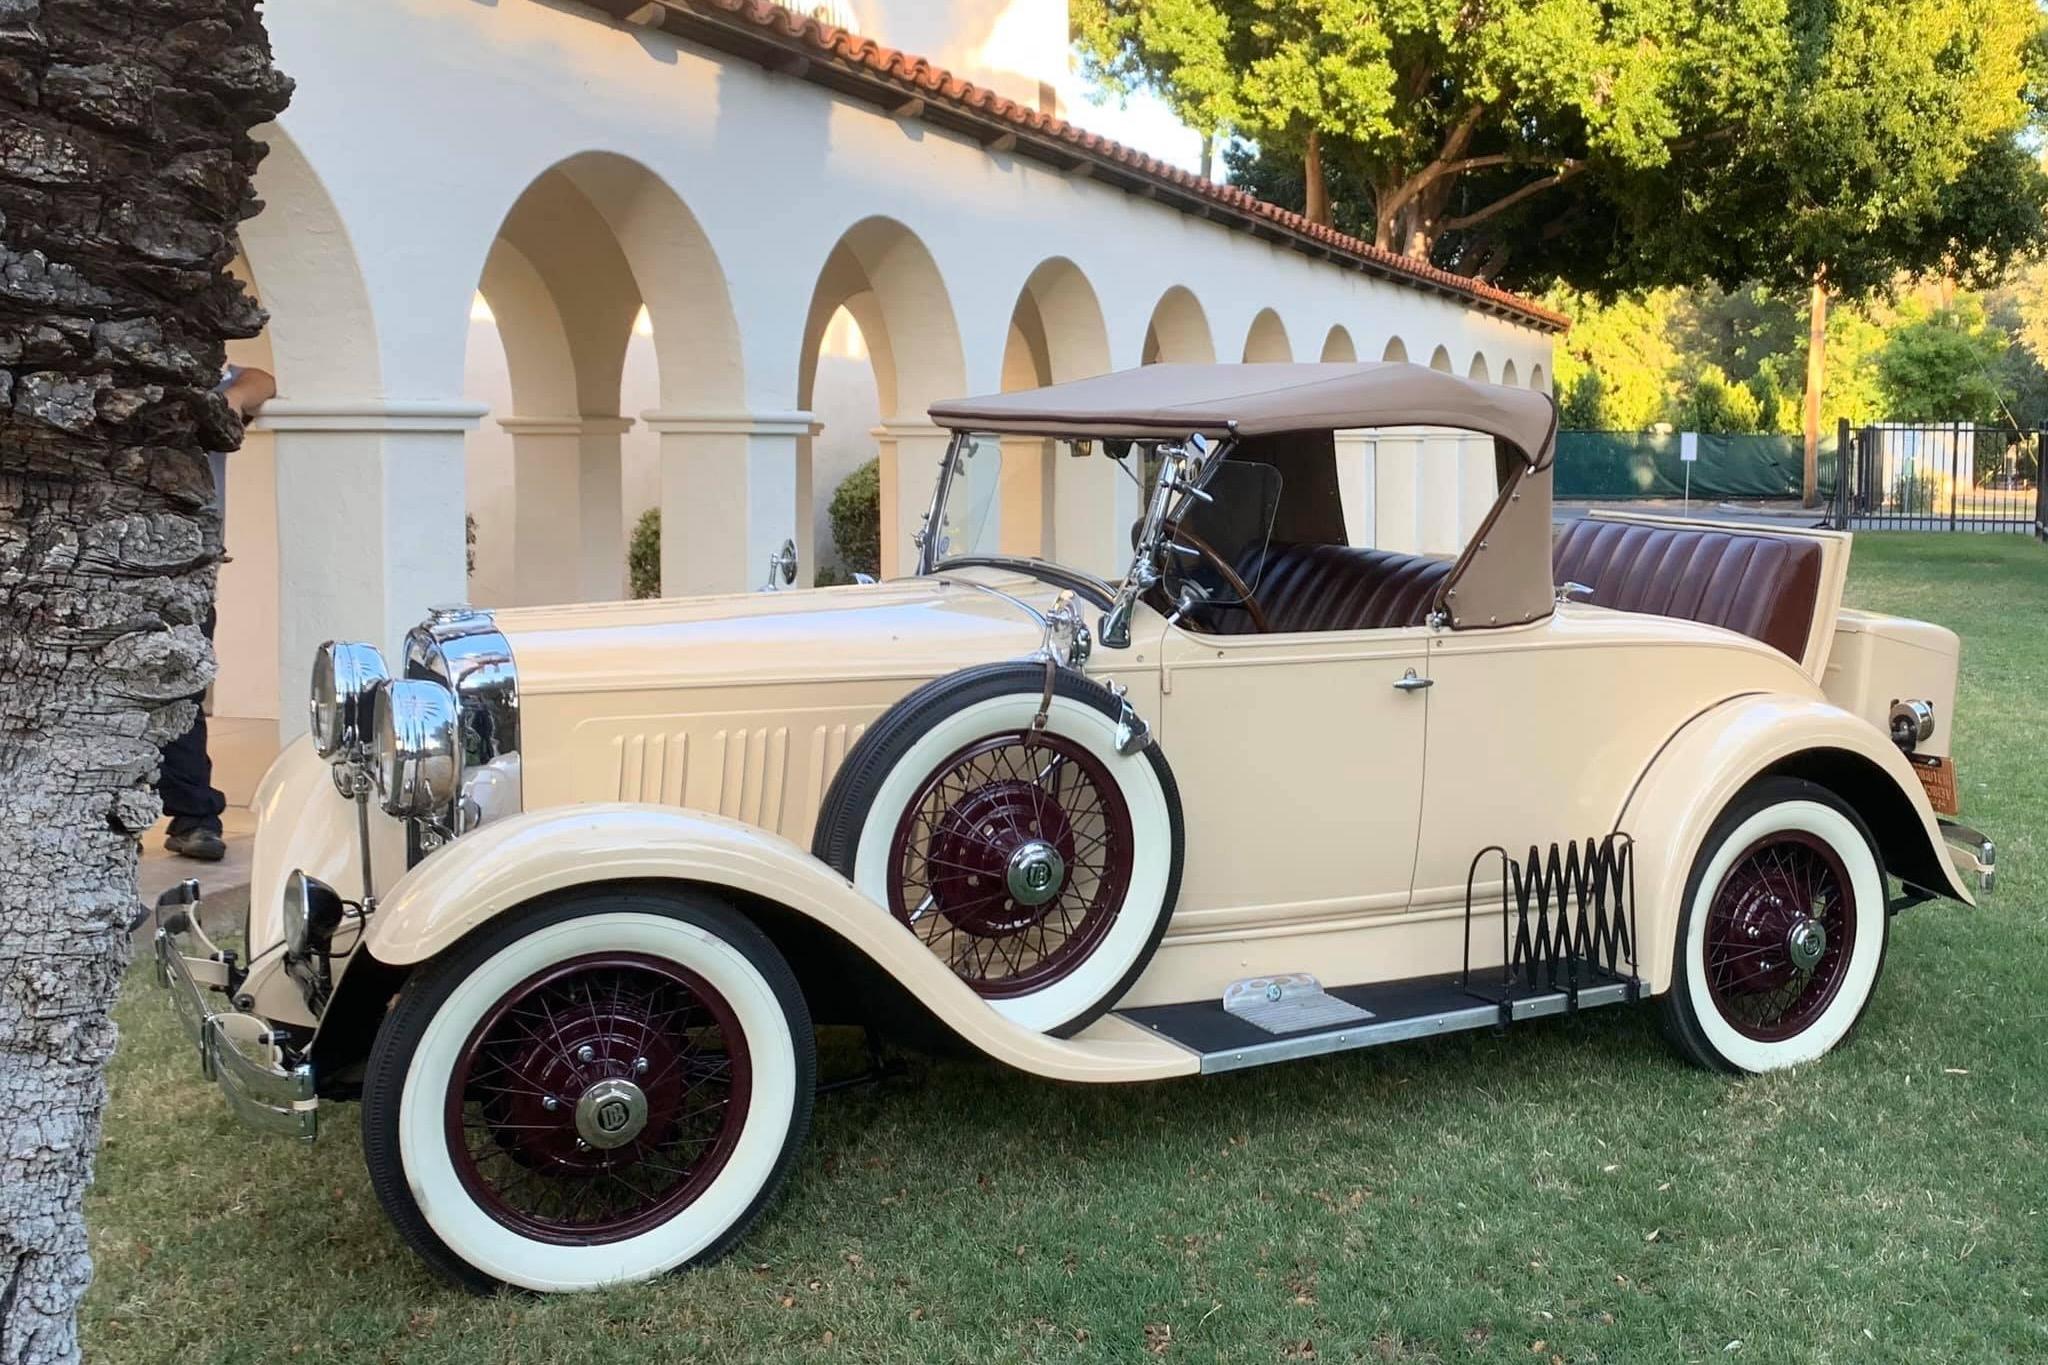 Generous Subscriber Donates 1929 Dodge Roadster to The Epoch Times